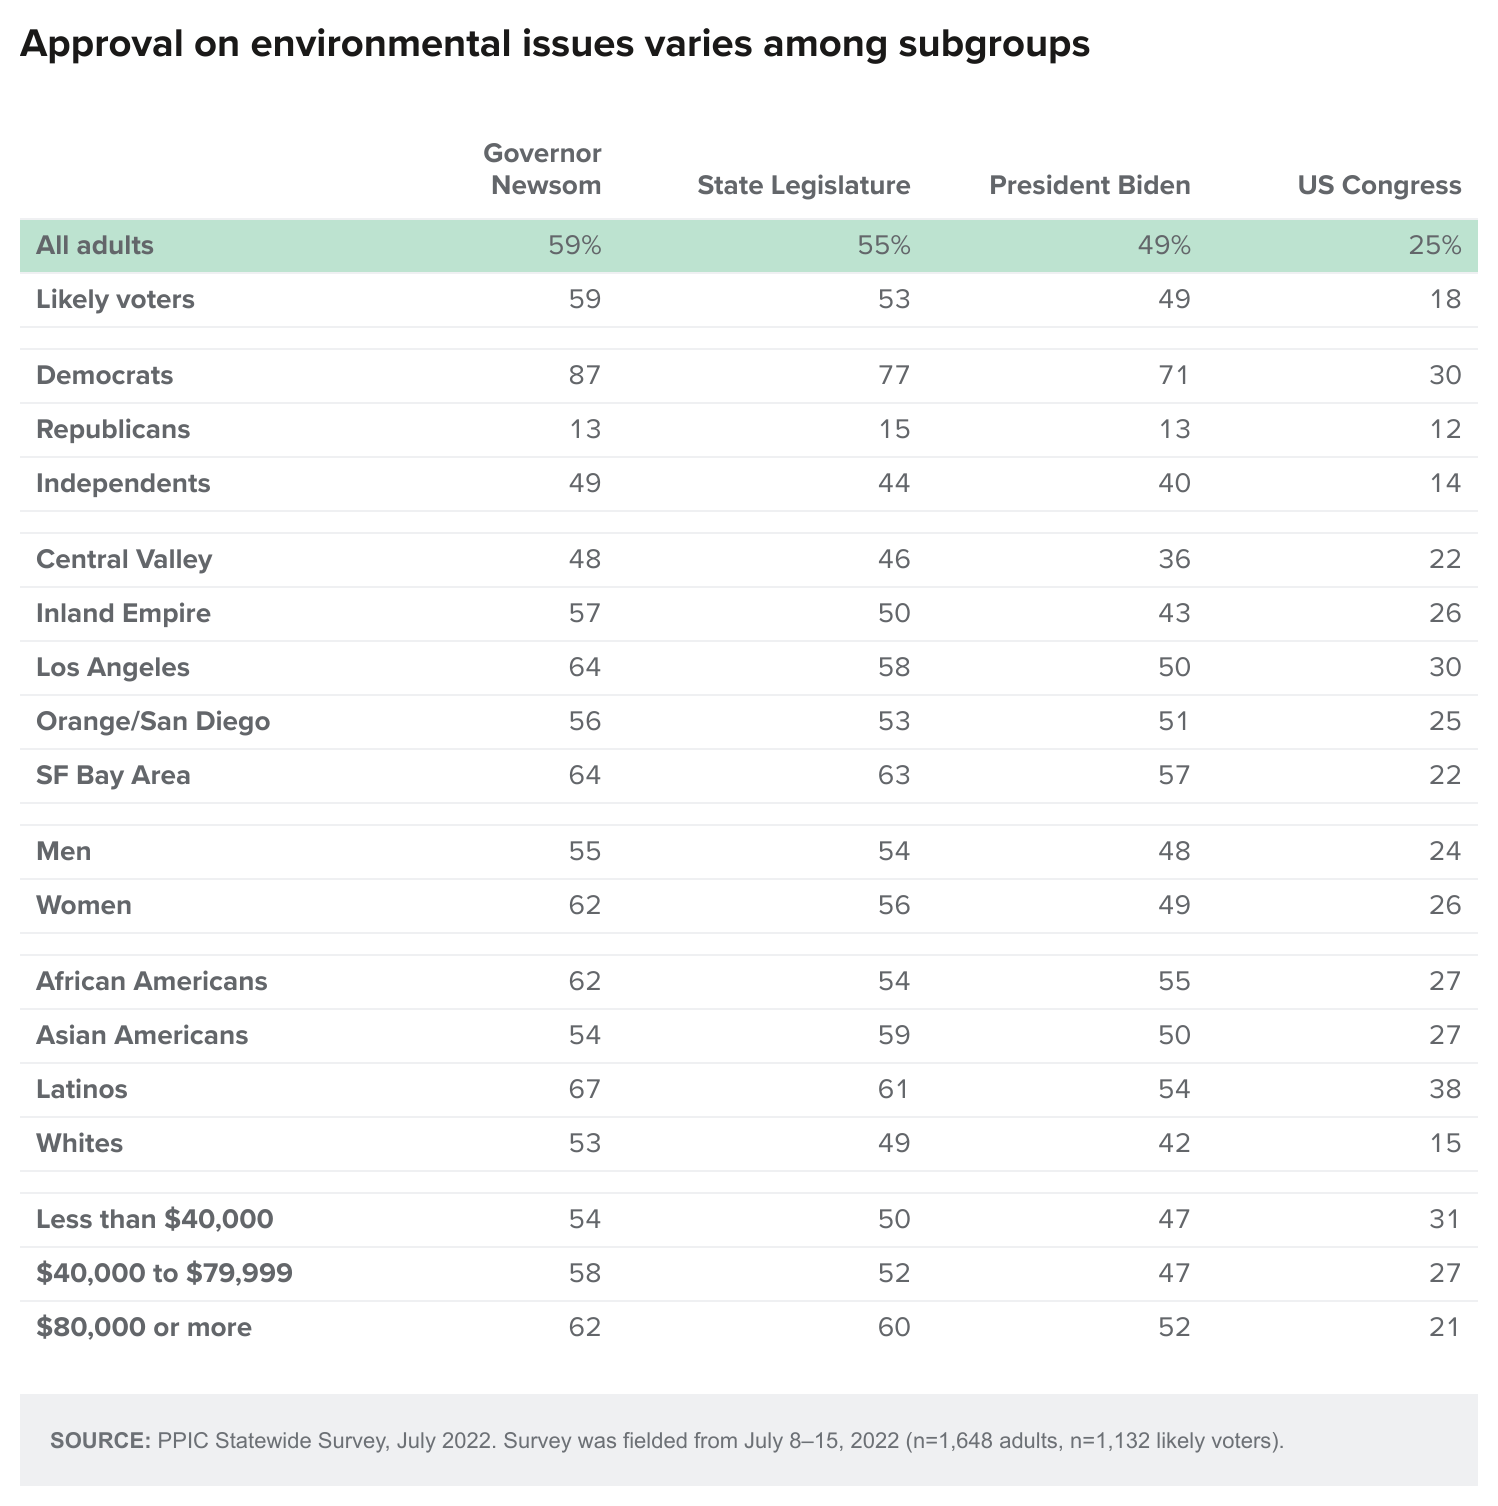 table - Approval on environmental issues varies among subgroups